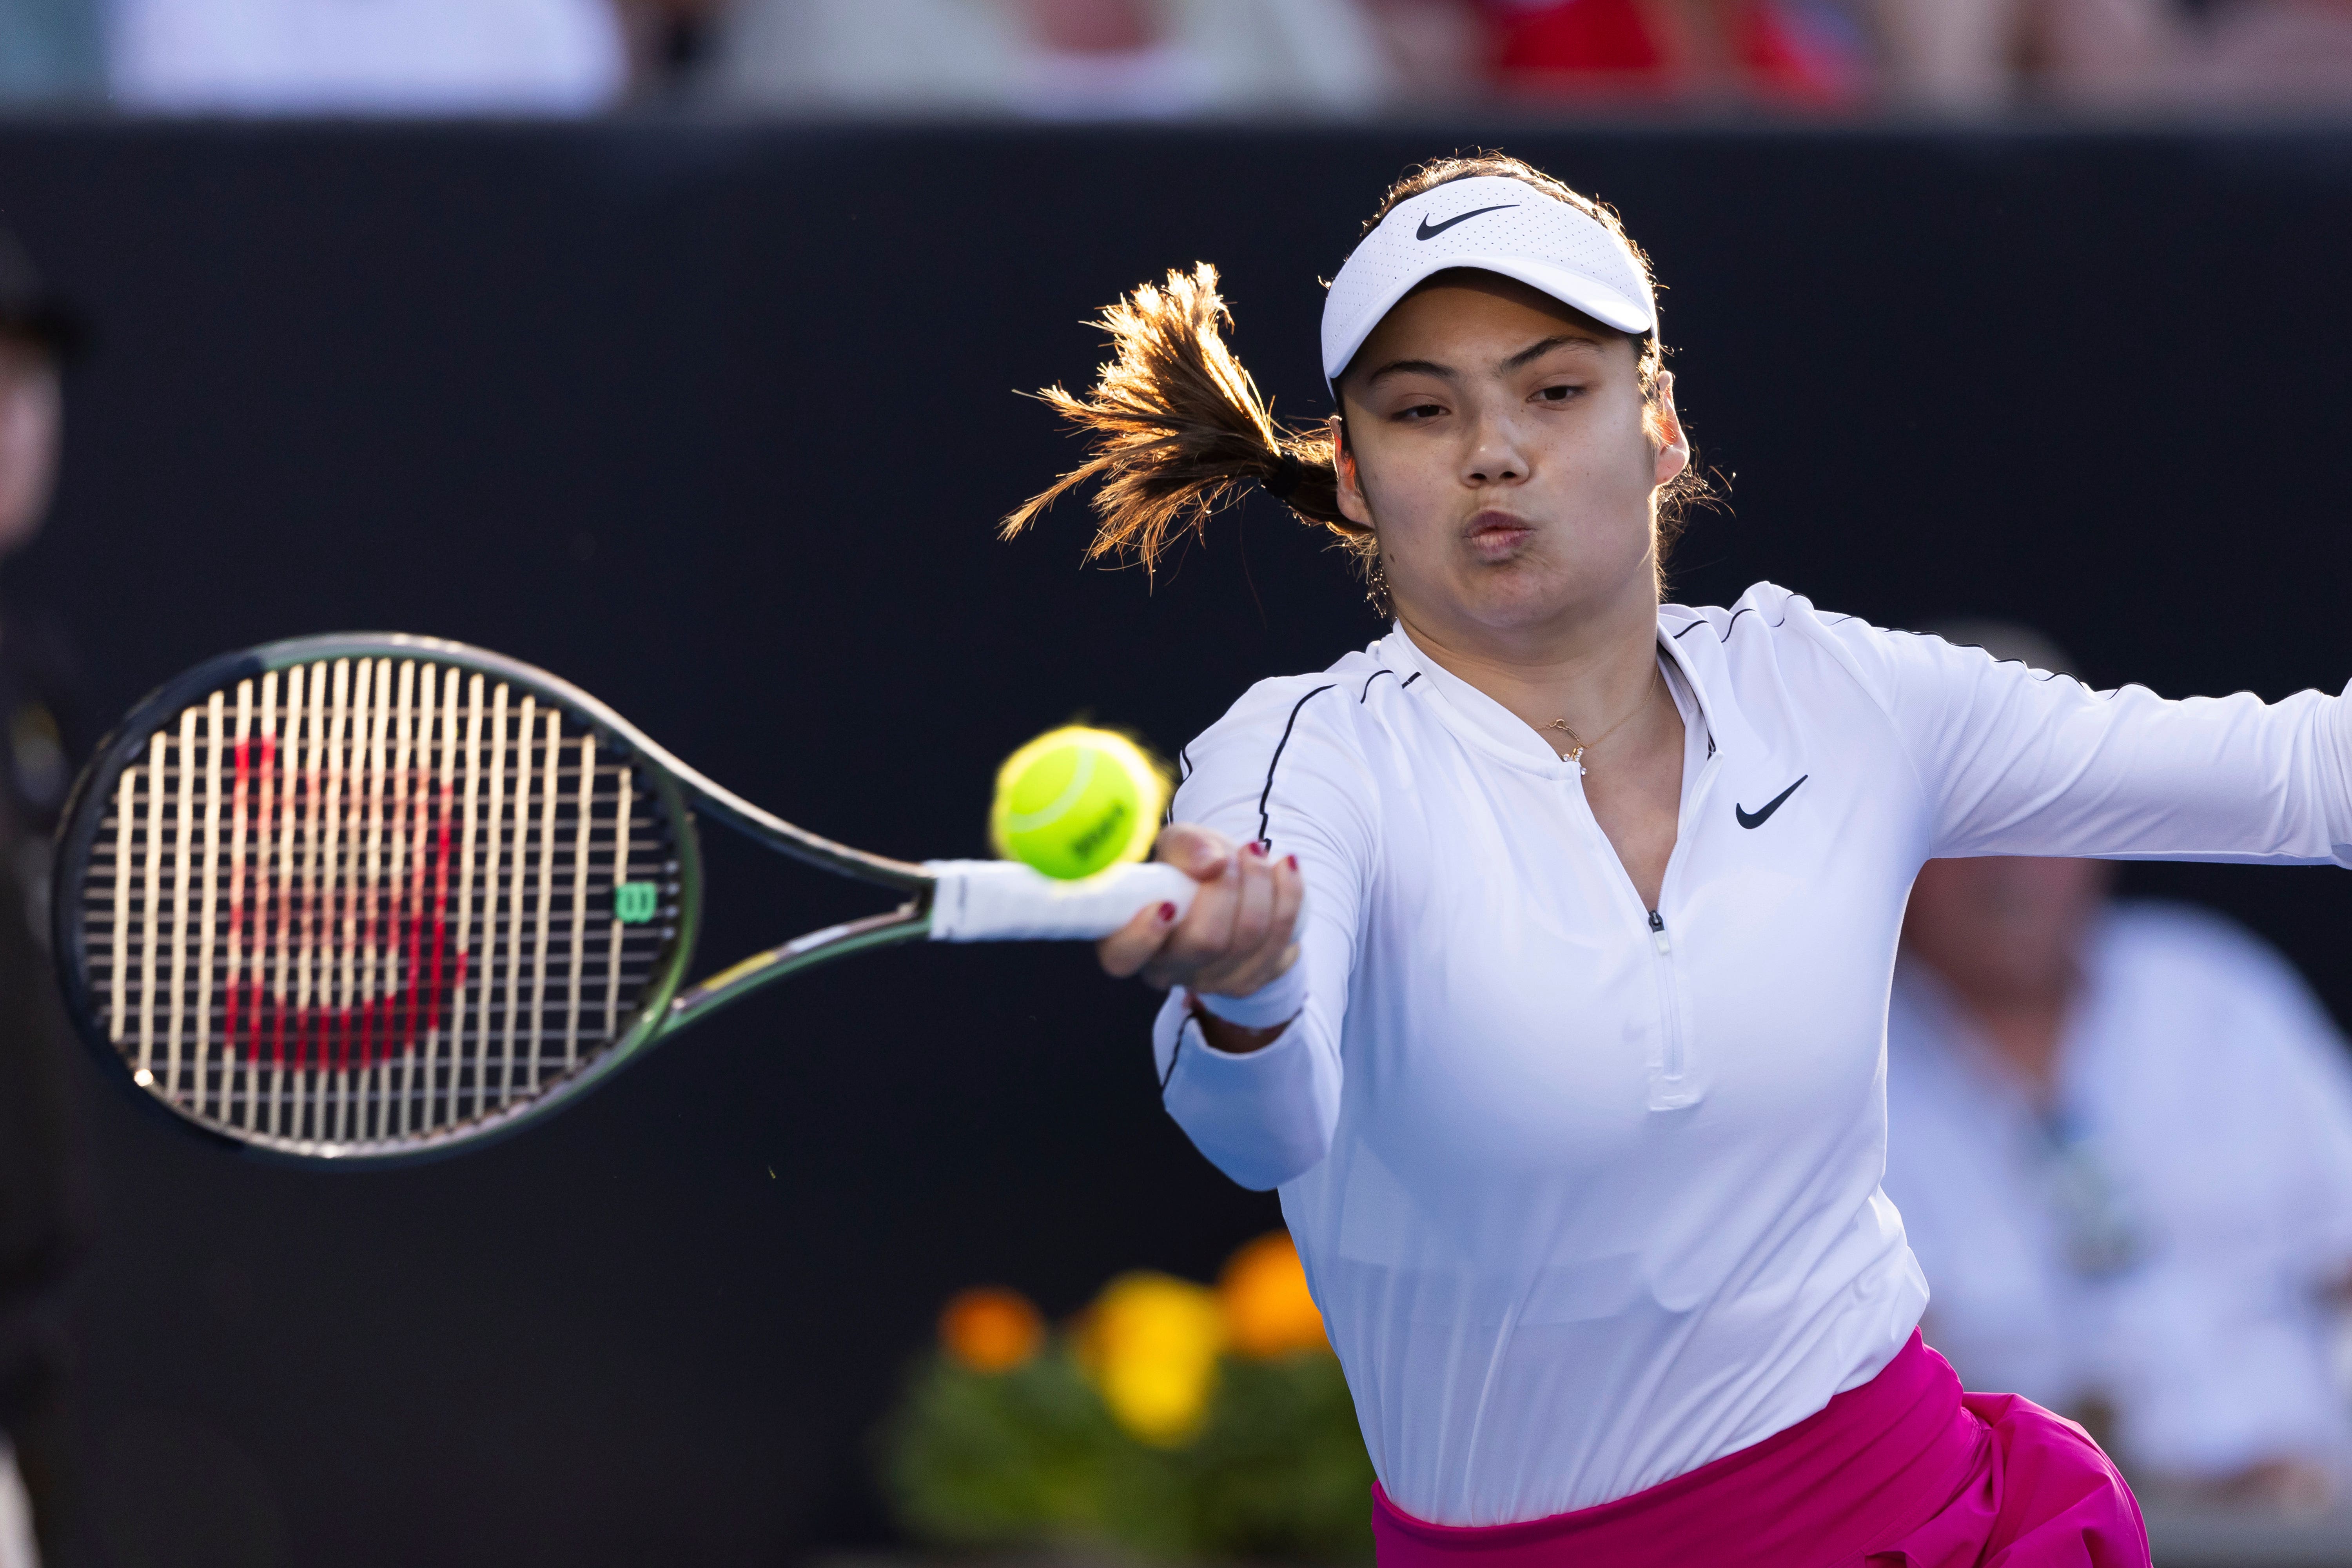 Emma Raducanu made her return to action in Auckland last week